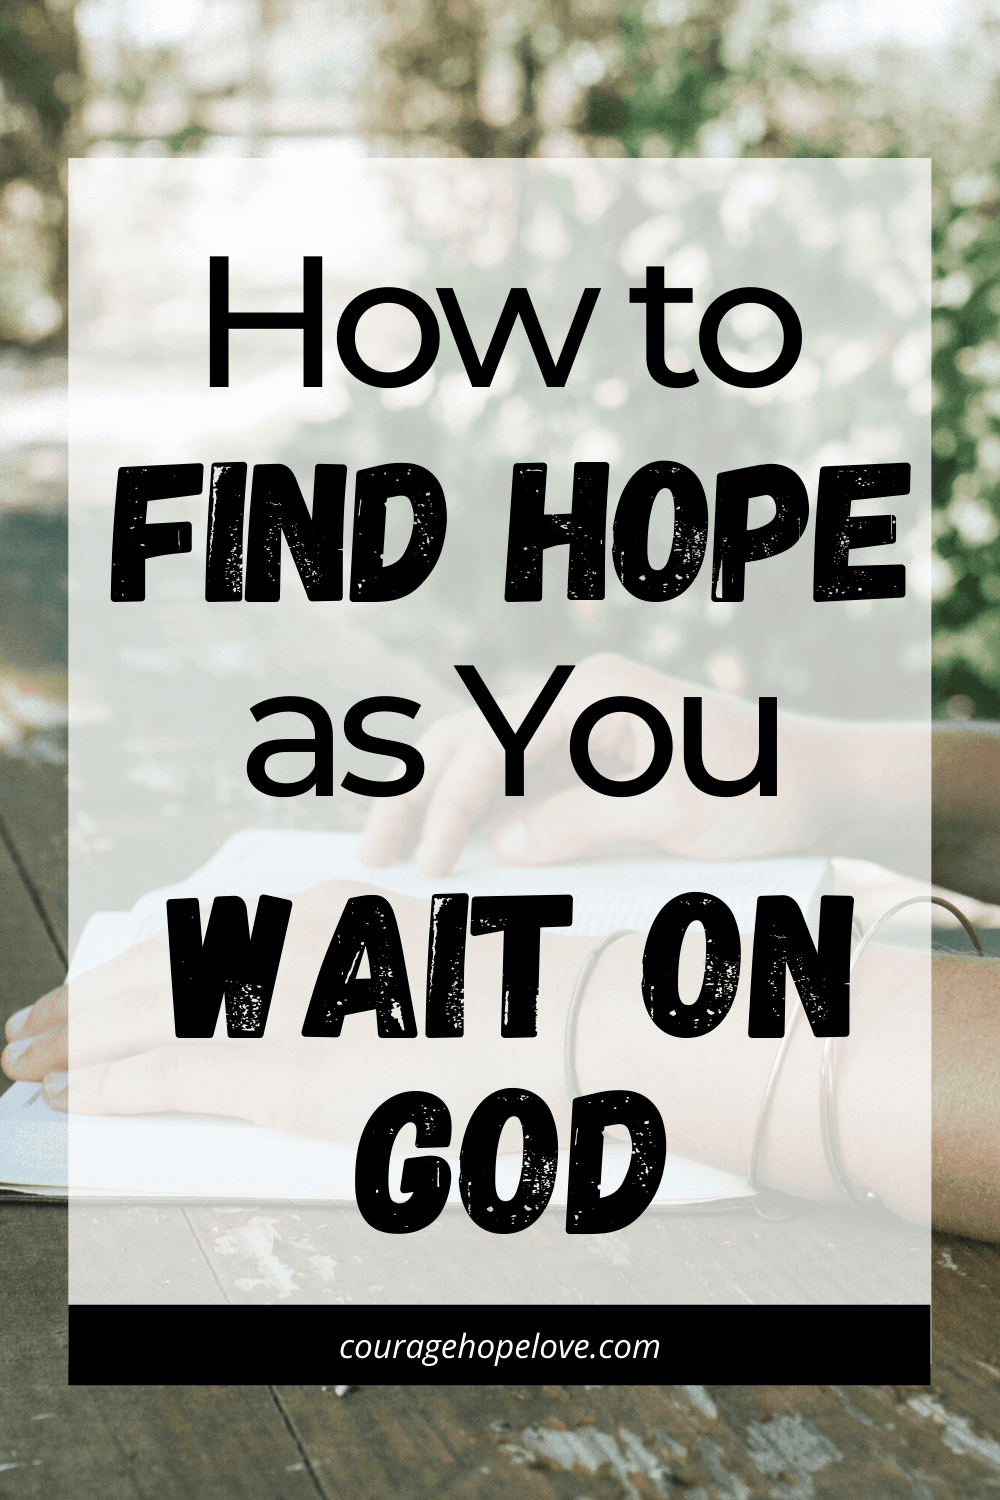 How to Find Hope as You Wait on God